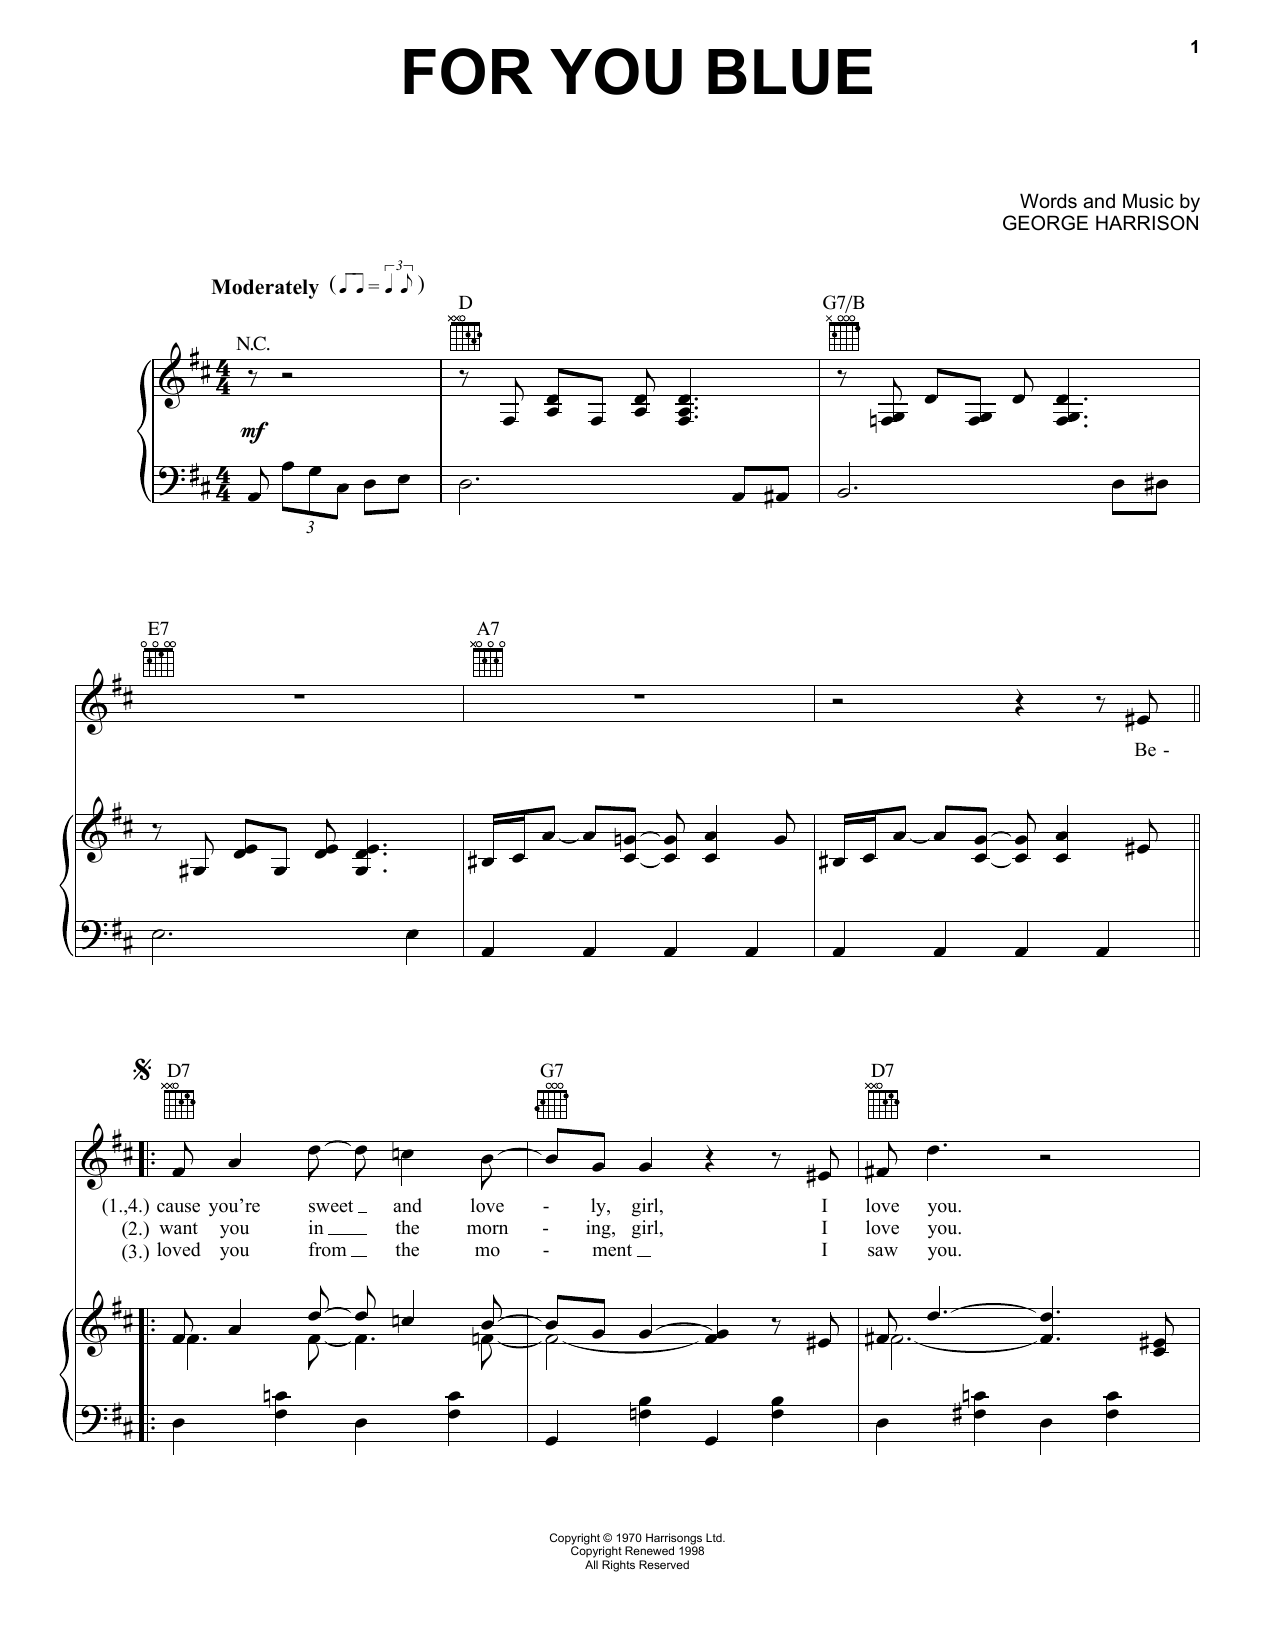 Download The Beatles For You Blue Sheet Music